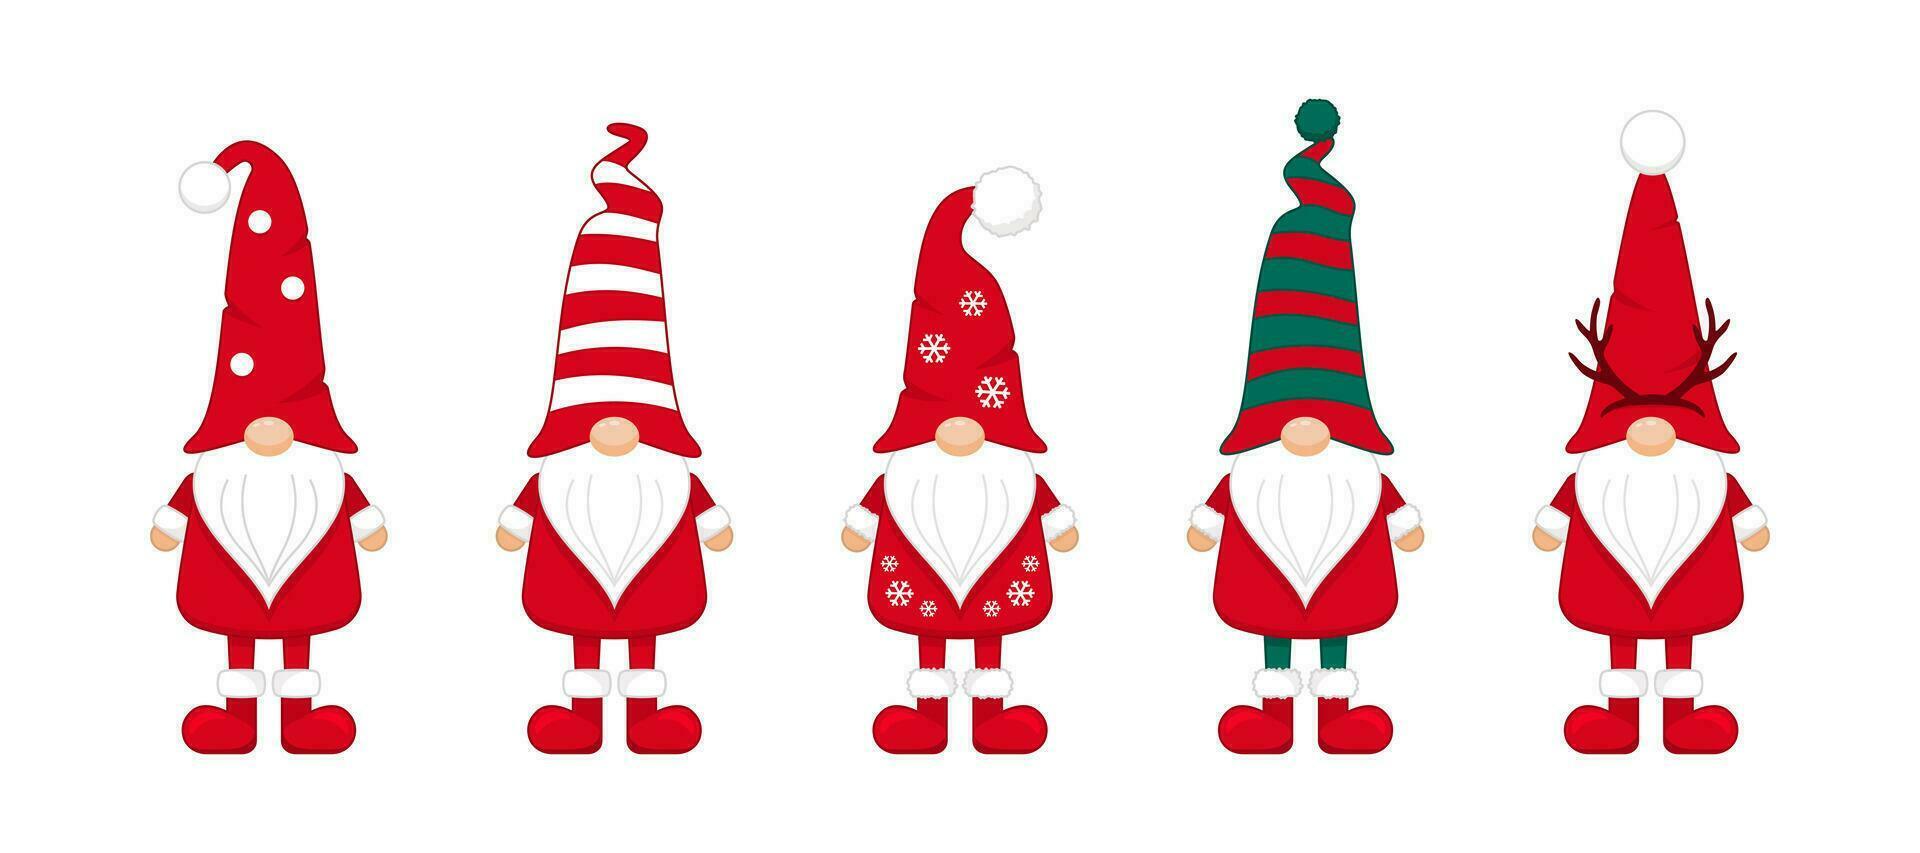 Christmas gnomes in long caps and red boots. Holiday new years character with striped in snowflakes and deer antlers hats covering his eyes with white beard festive symbol of wealth and prosperity vector